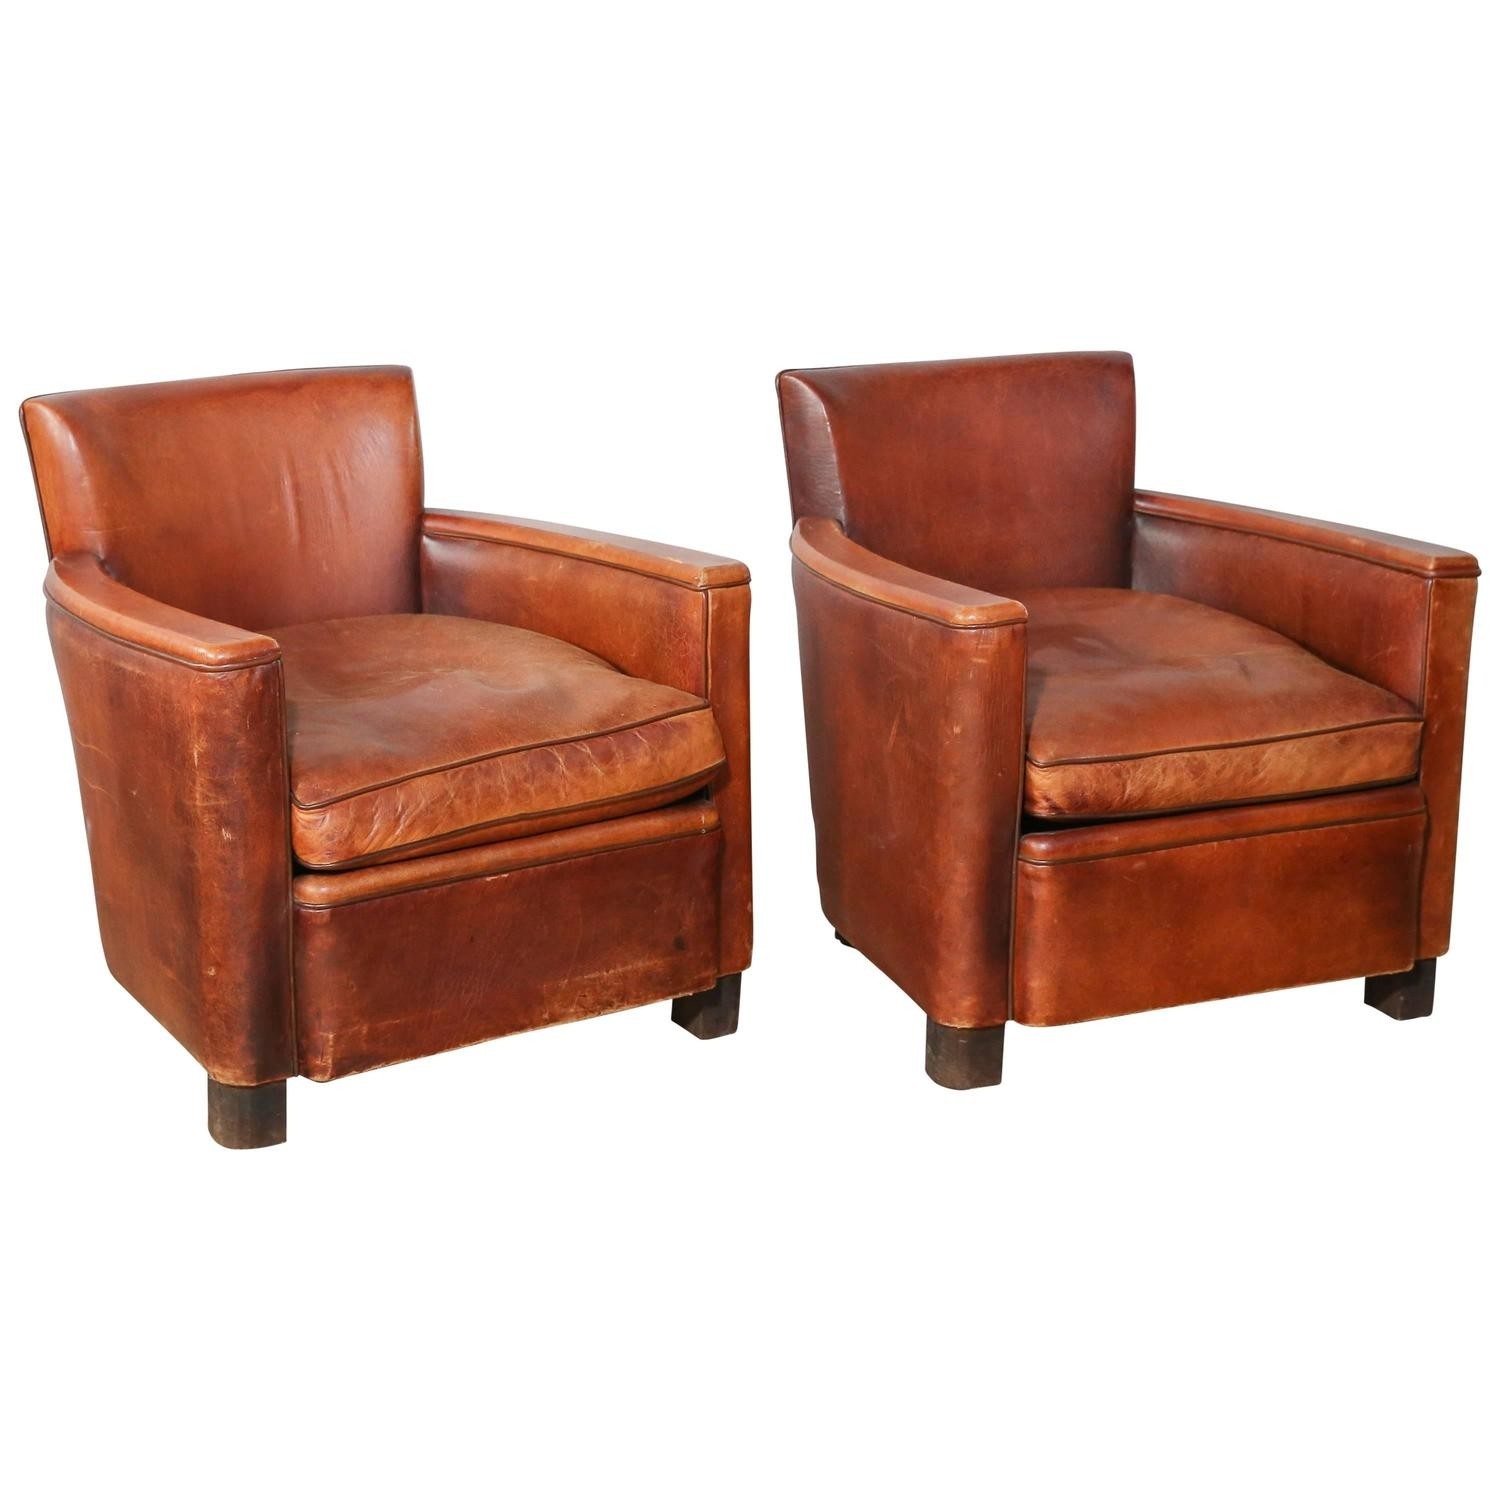 Pair of vintage leather club chairs for sale at 1stdibs